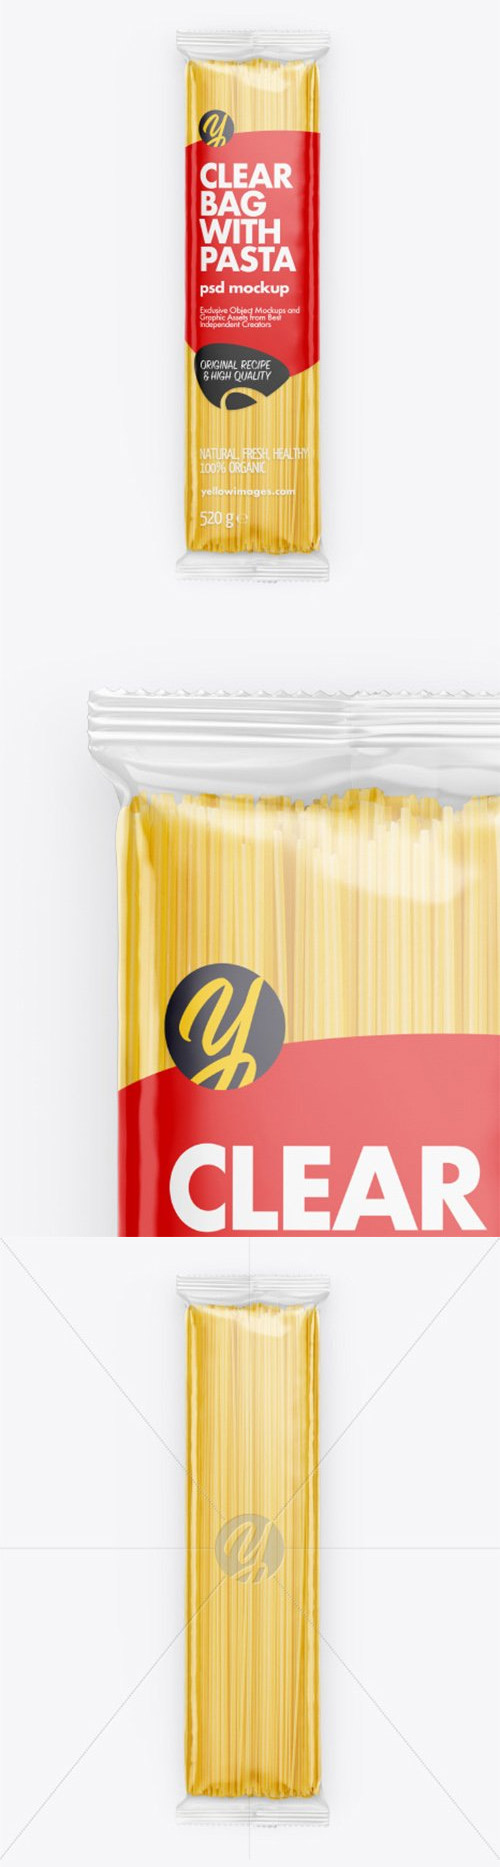 Clear Bag With Pasta Mockup 65610